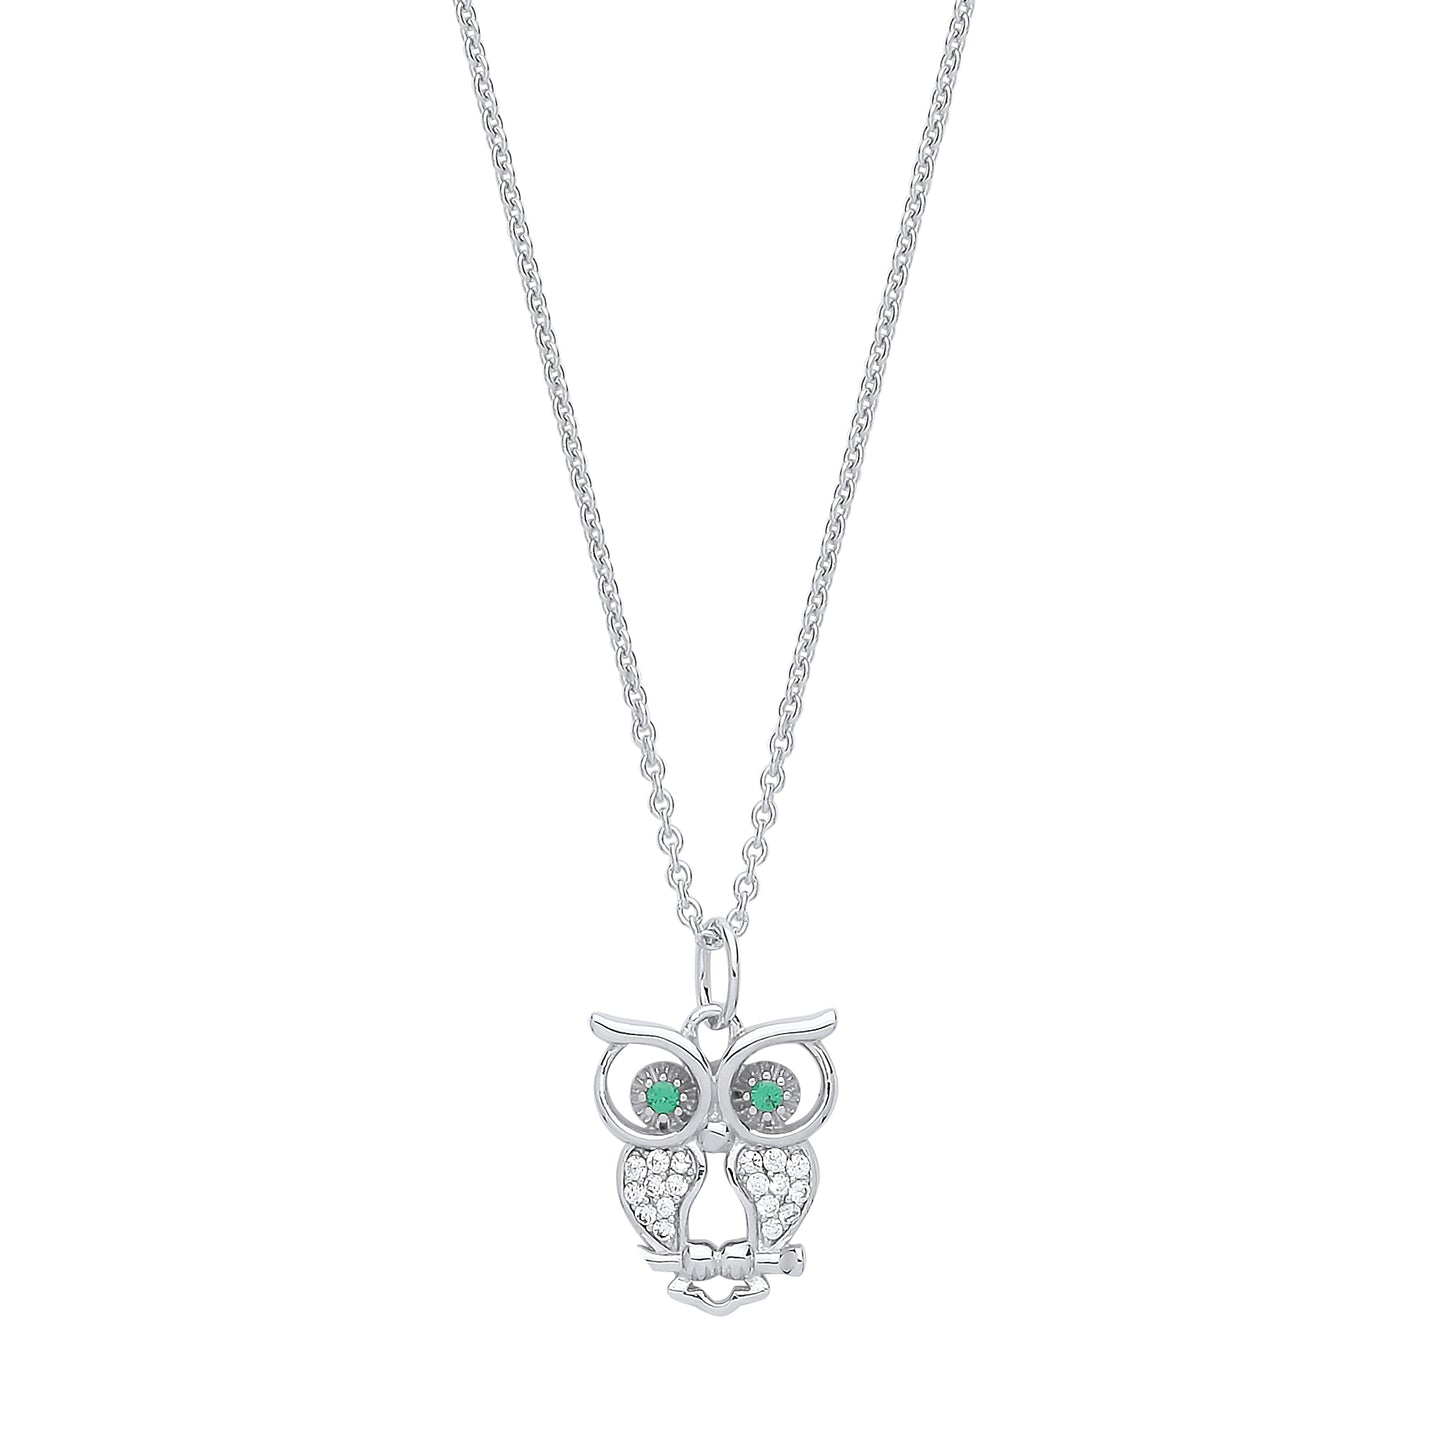 Silver  Green CZ Wise Owl Hoot Charm Necklace - GVK322